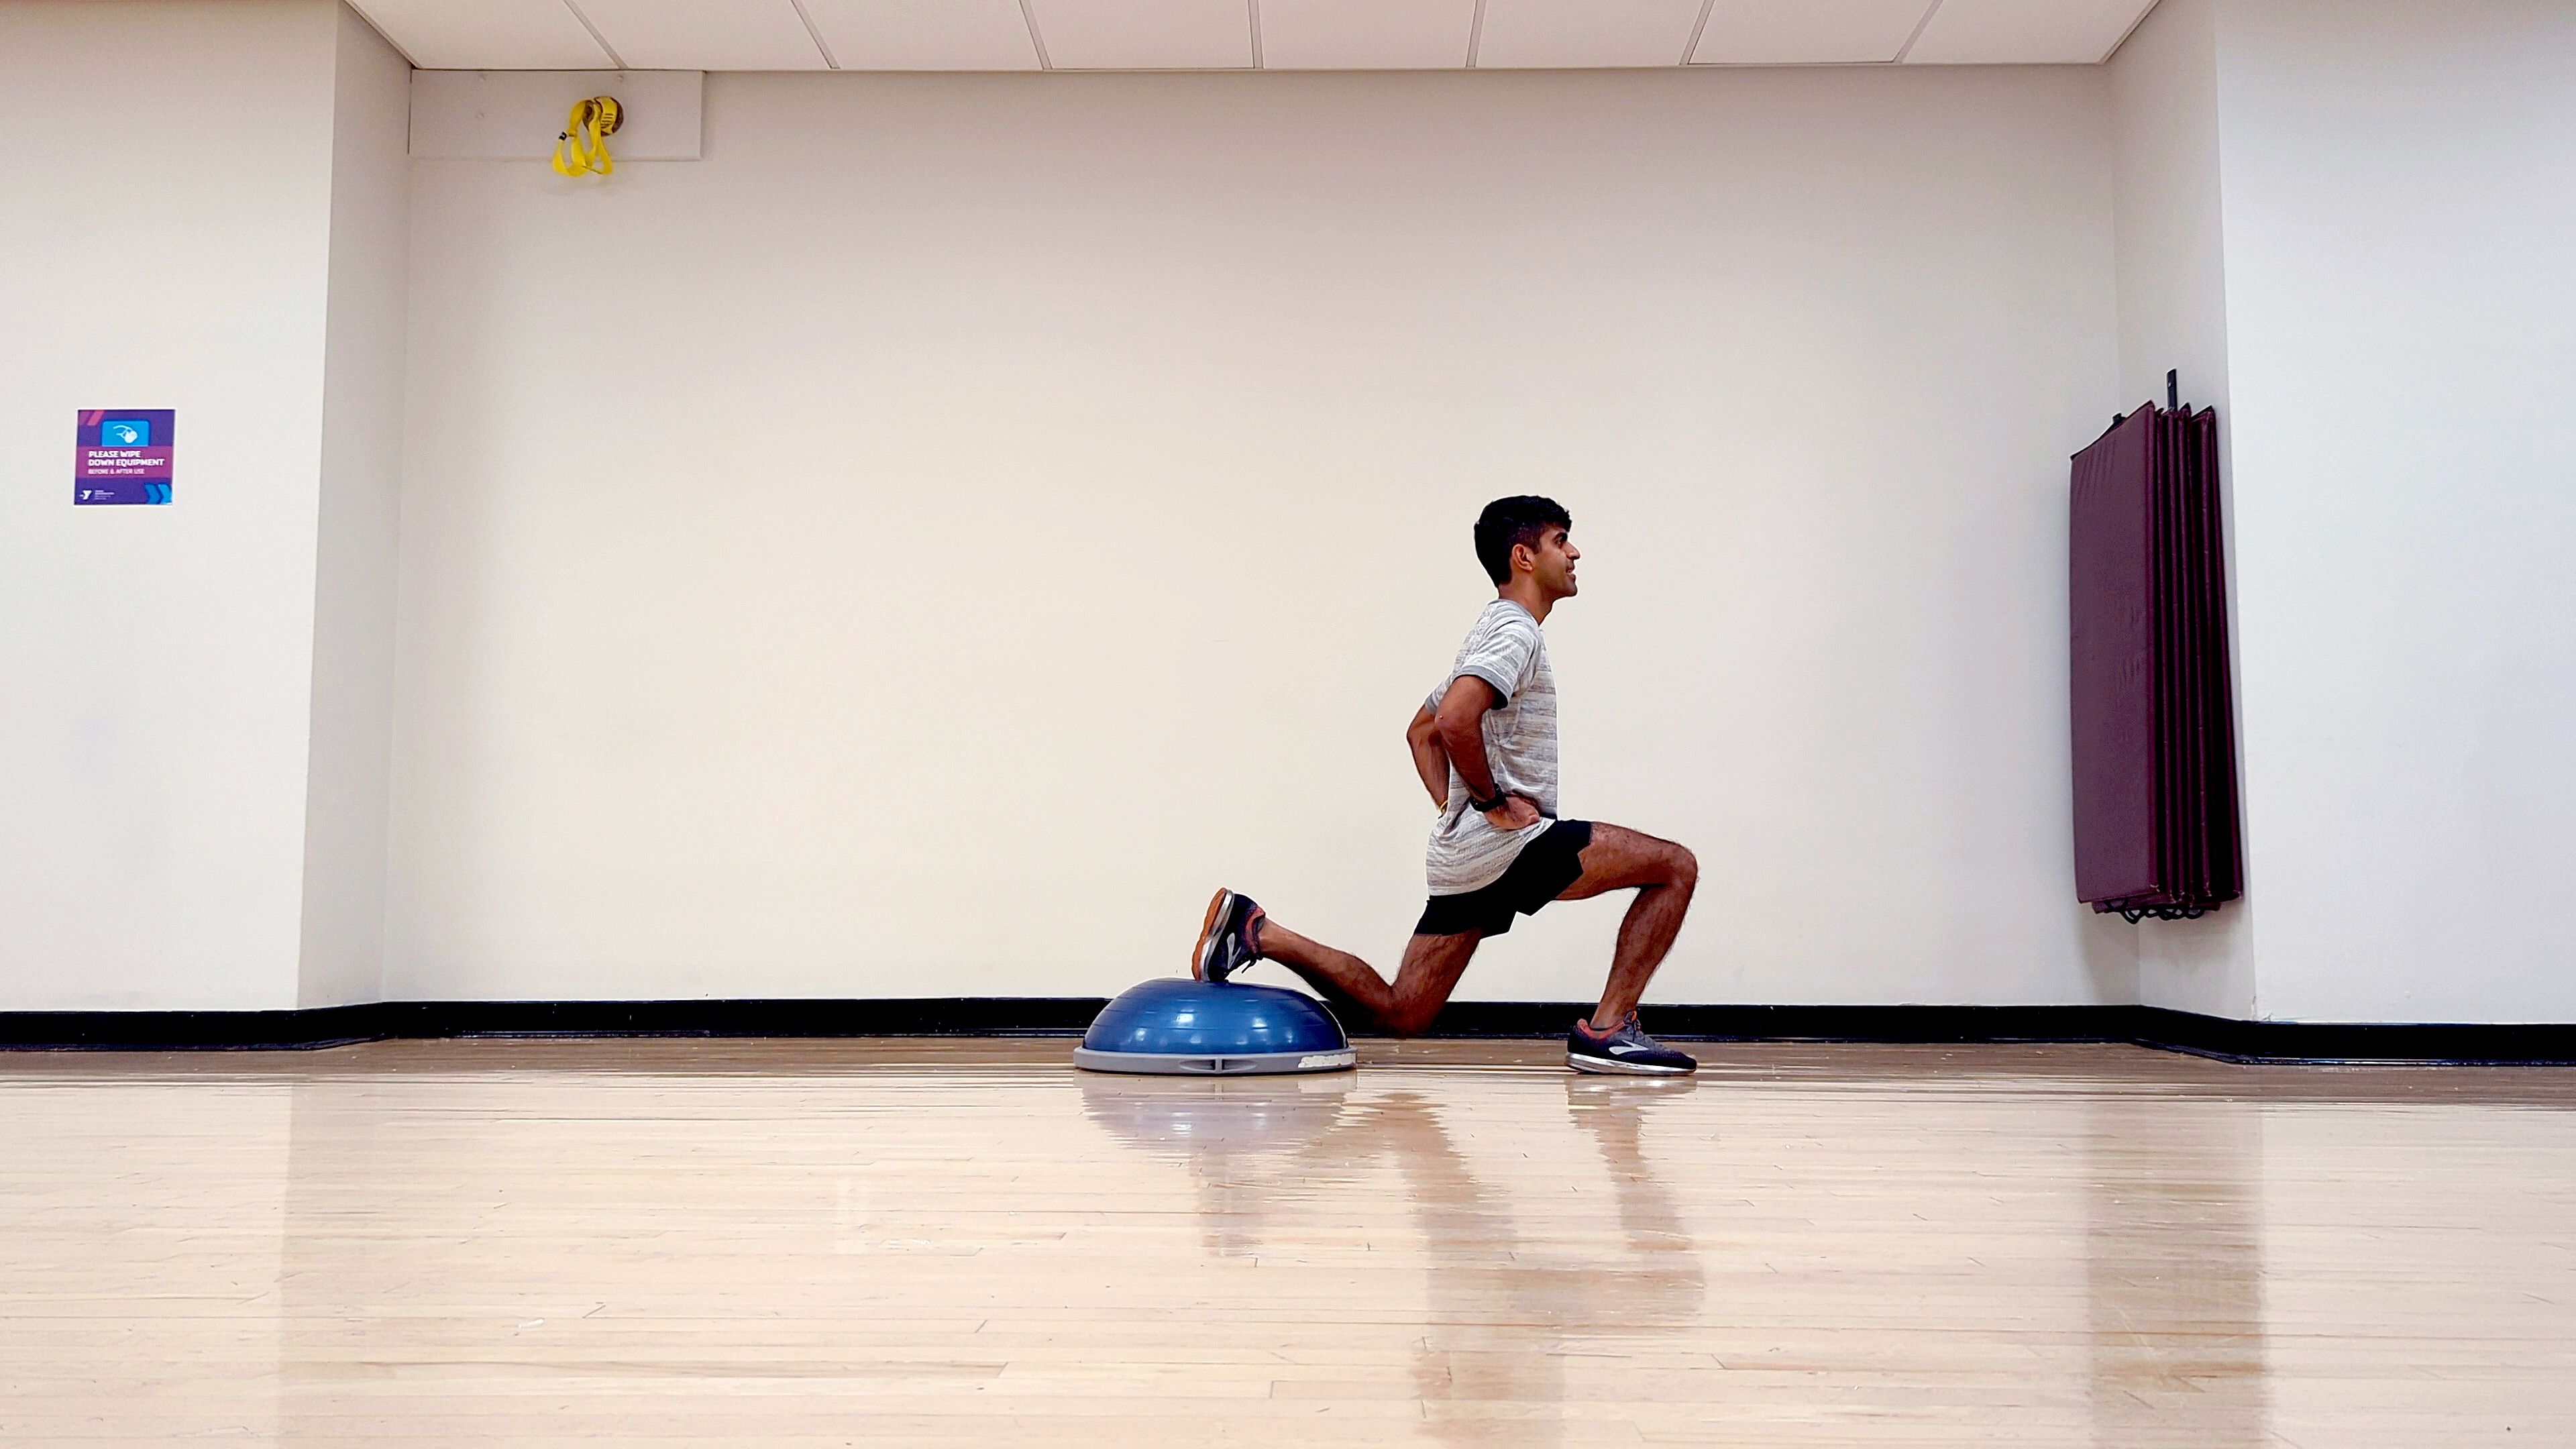 Bosu Ball Exercises for Beginners: Workout to Challenge Stability